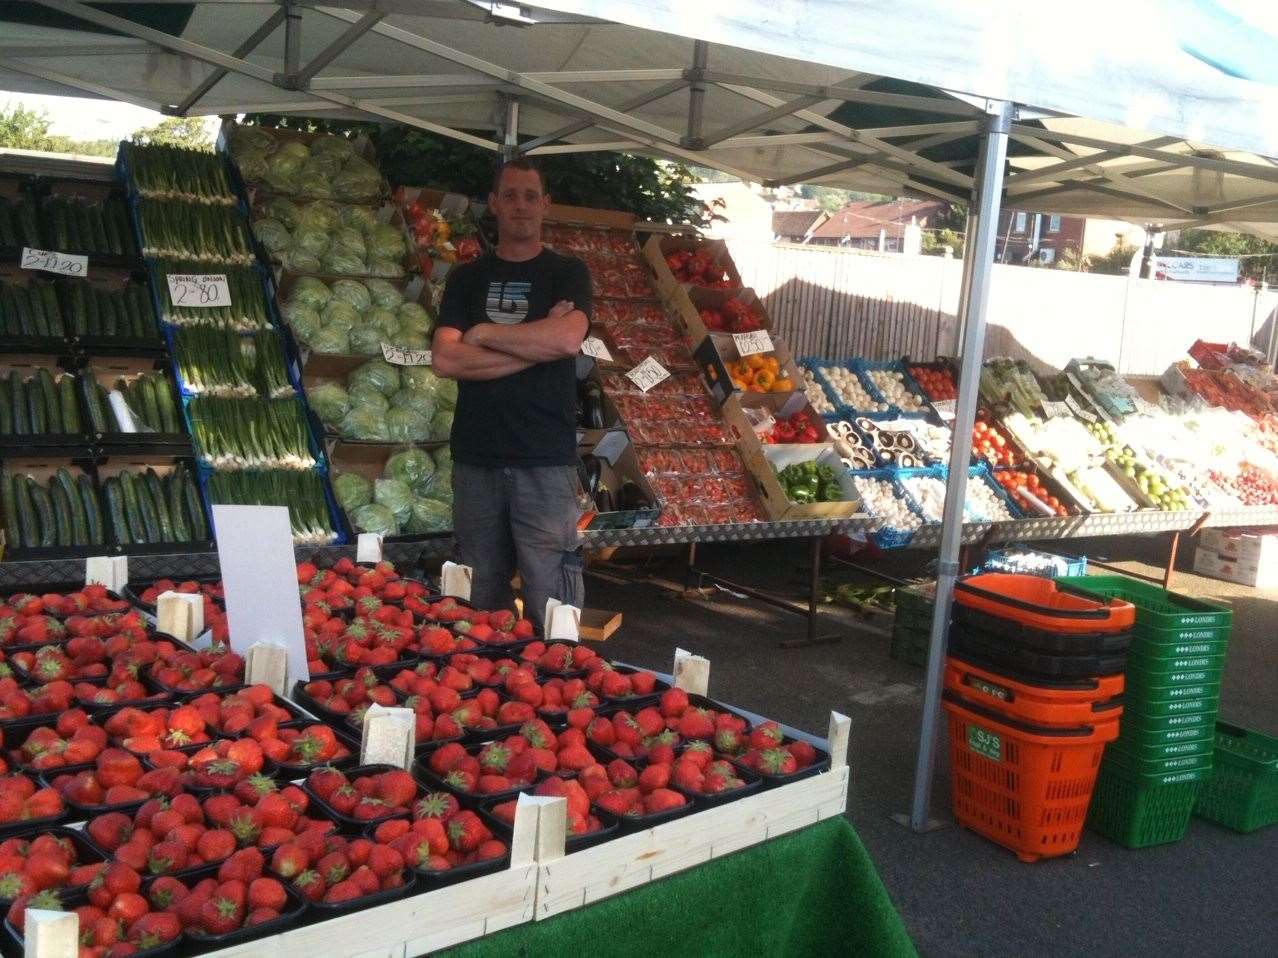 The fruit and veg stall run by Stephen Moore in the Golden Valley car park has now been closed